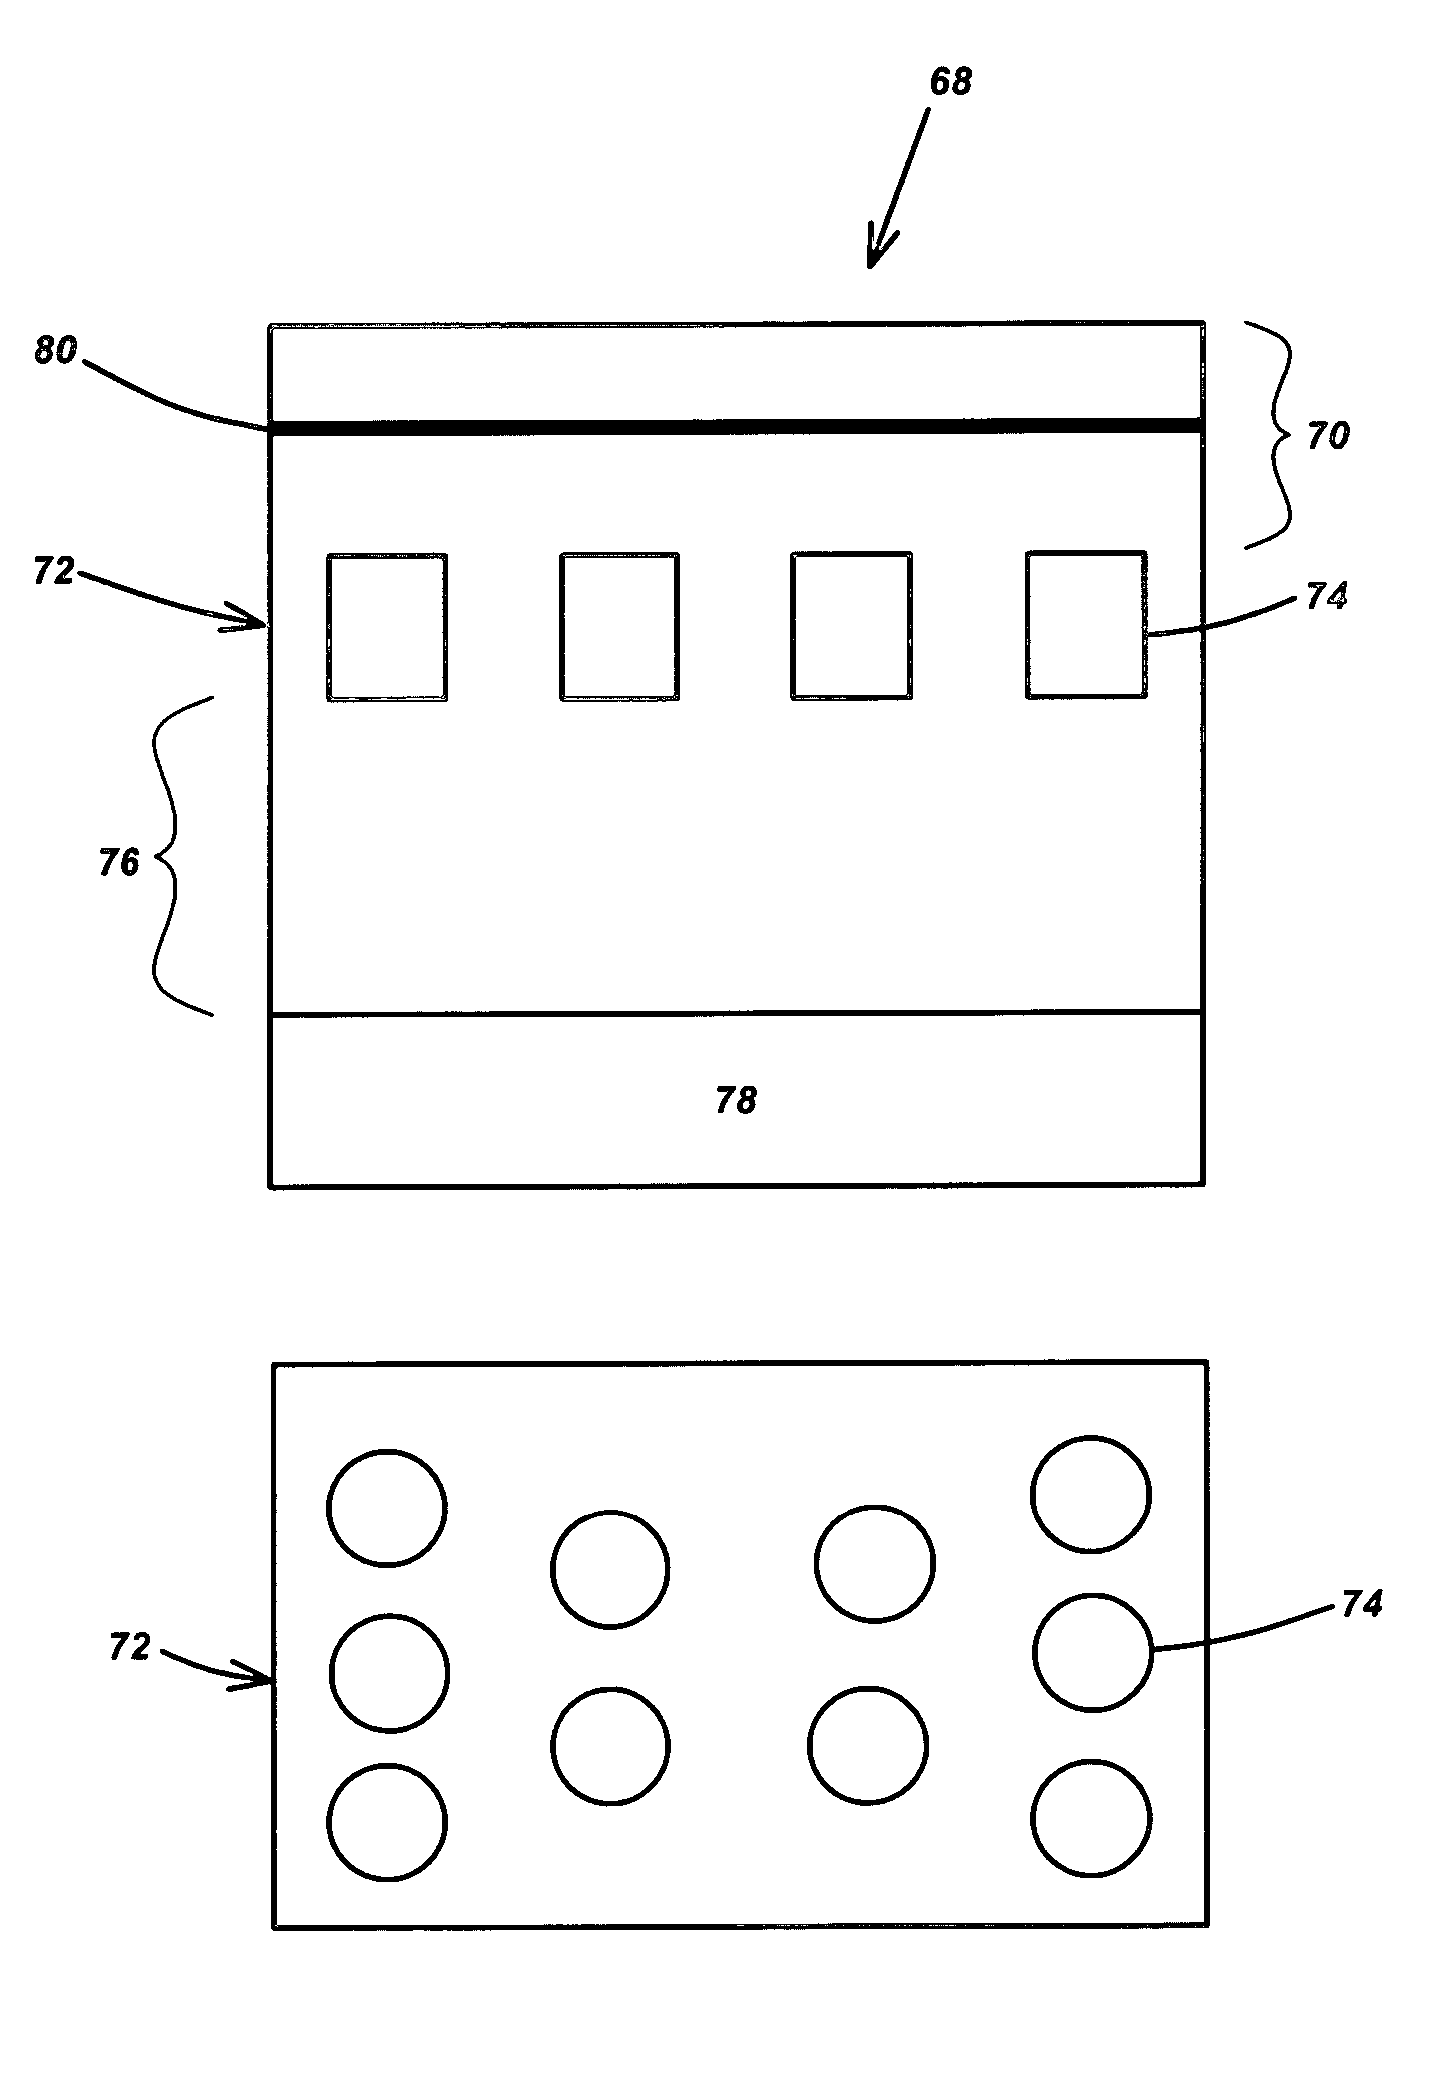 Single or multi-color high efficiency light emitting diode (LED) by growth over a patterned substrate